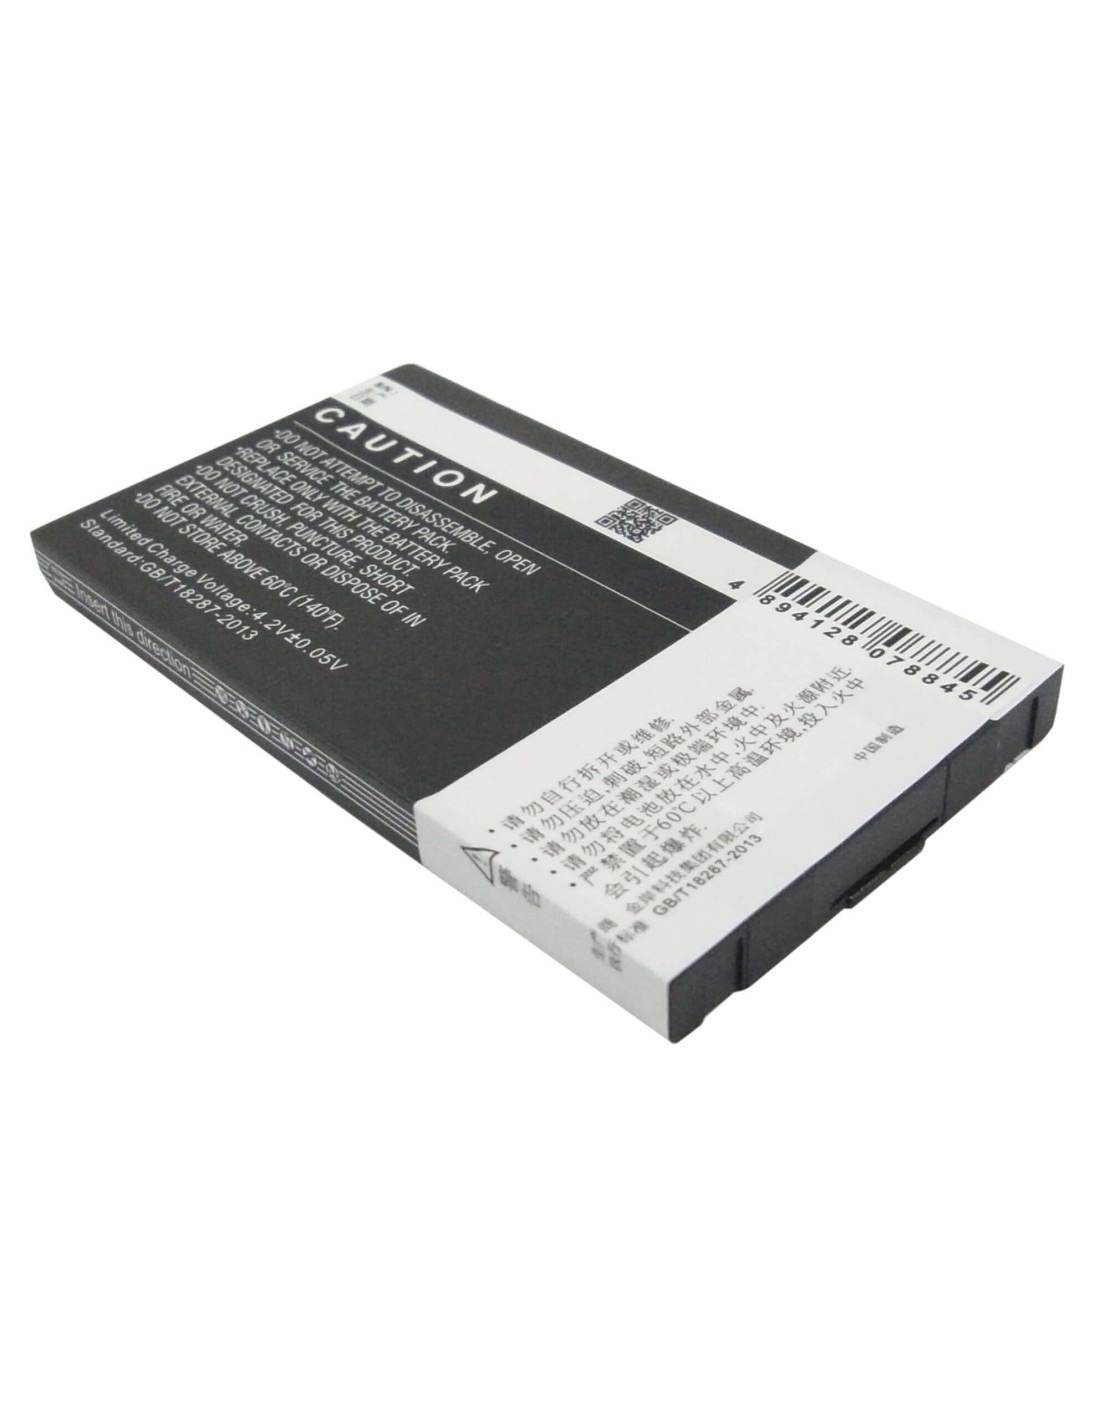 Battery for Coolpad 8688 3.7V, 1350mAh - 5.00Wh